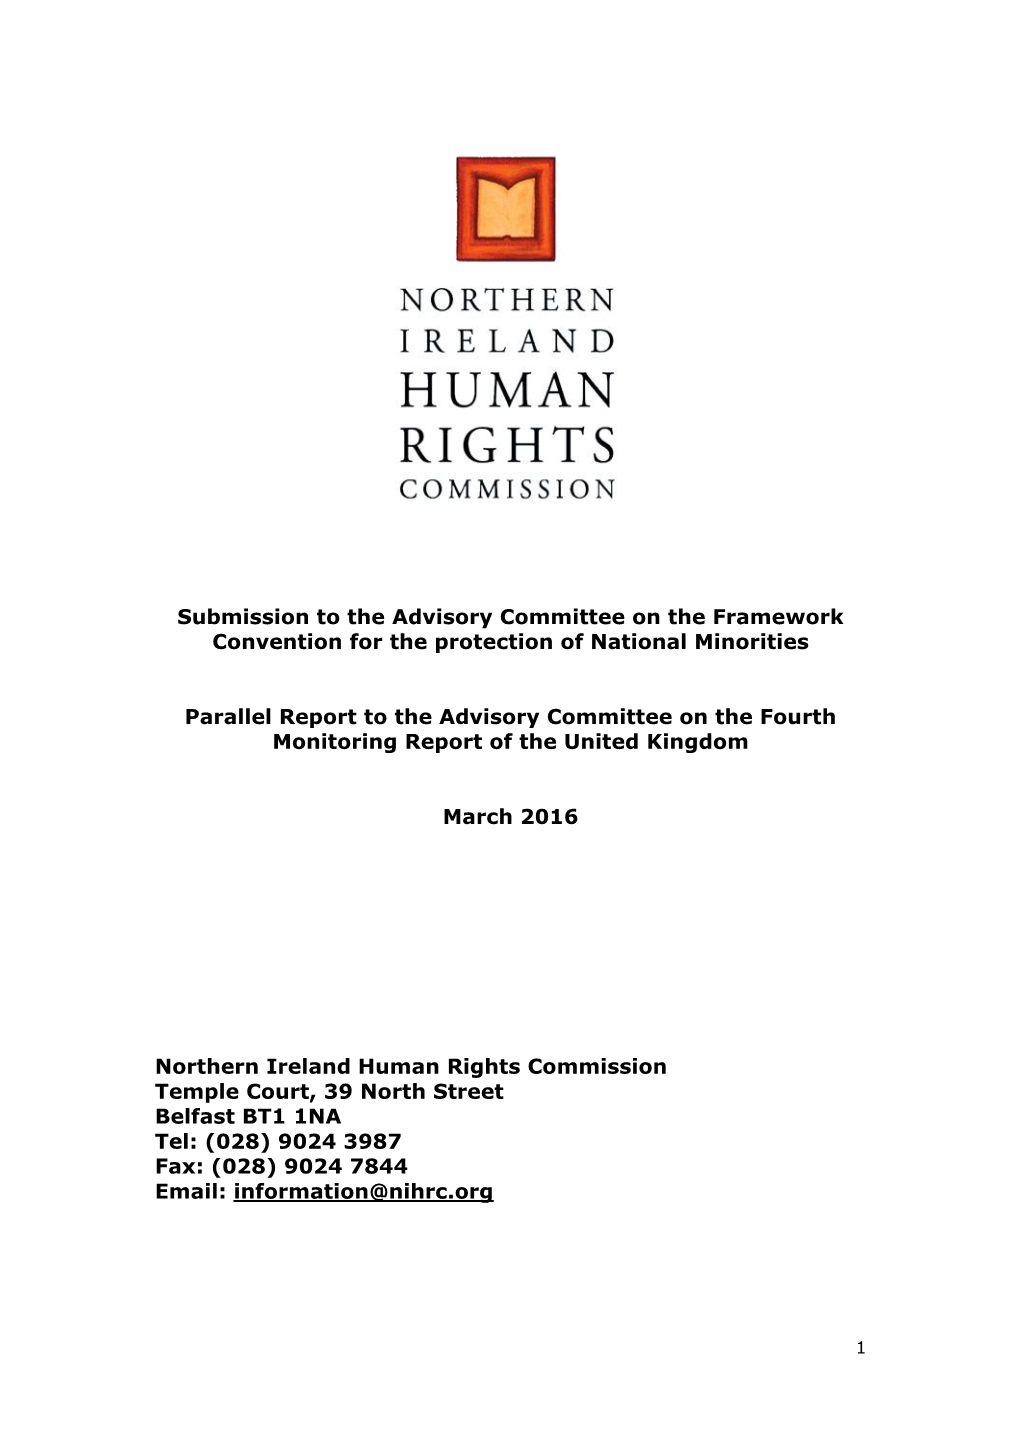 Submission to the Advisory Committee on the Framework Convention for the Protection of National Minorities